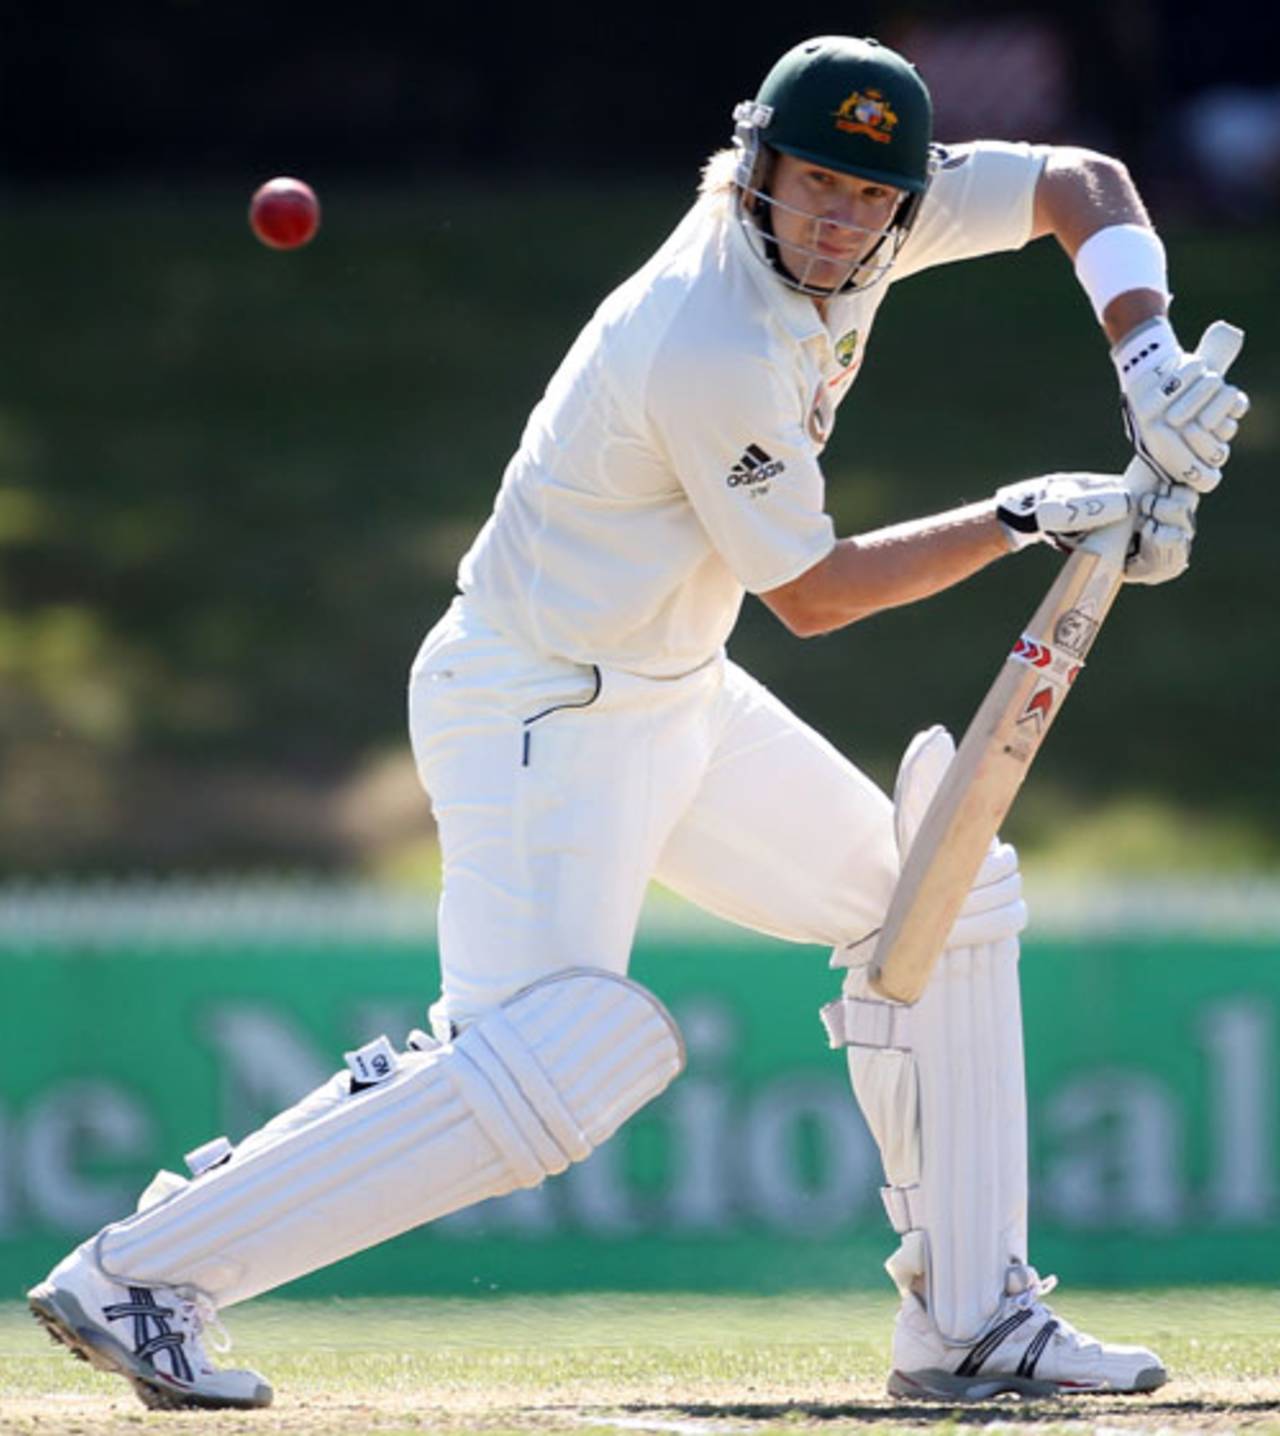 On the rise: Shane Watson's strong Test form has made him one of Australia's most attractive players&nbsp;&nbsp;&bull;&nbsp;&nbsp;Getty Images